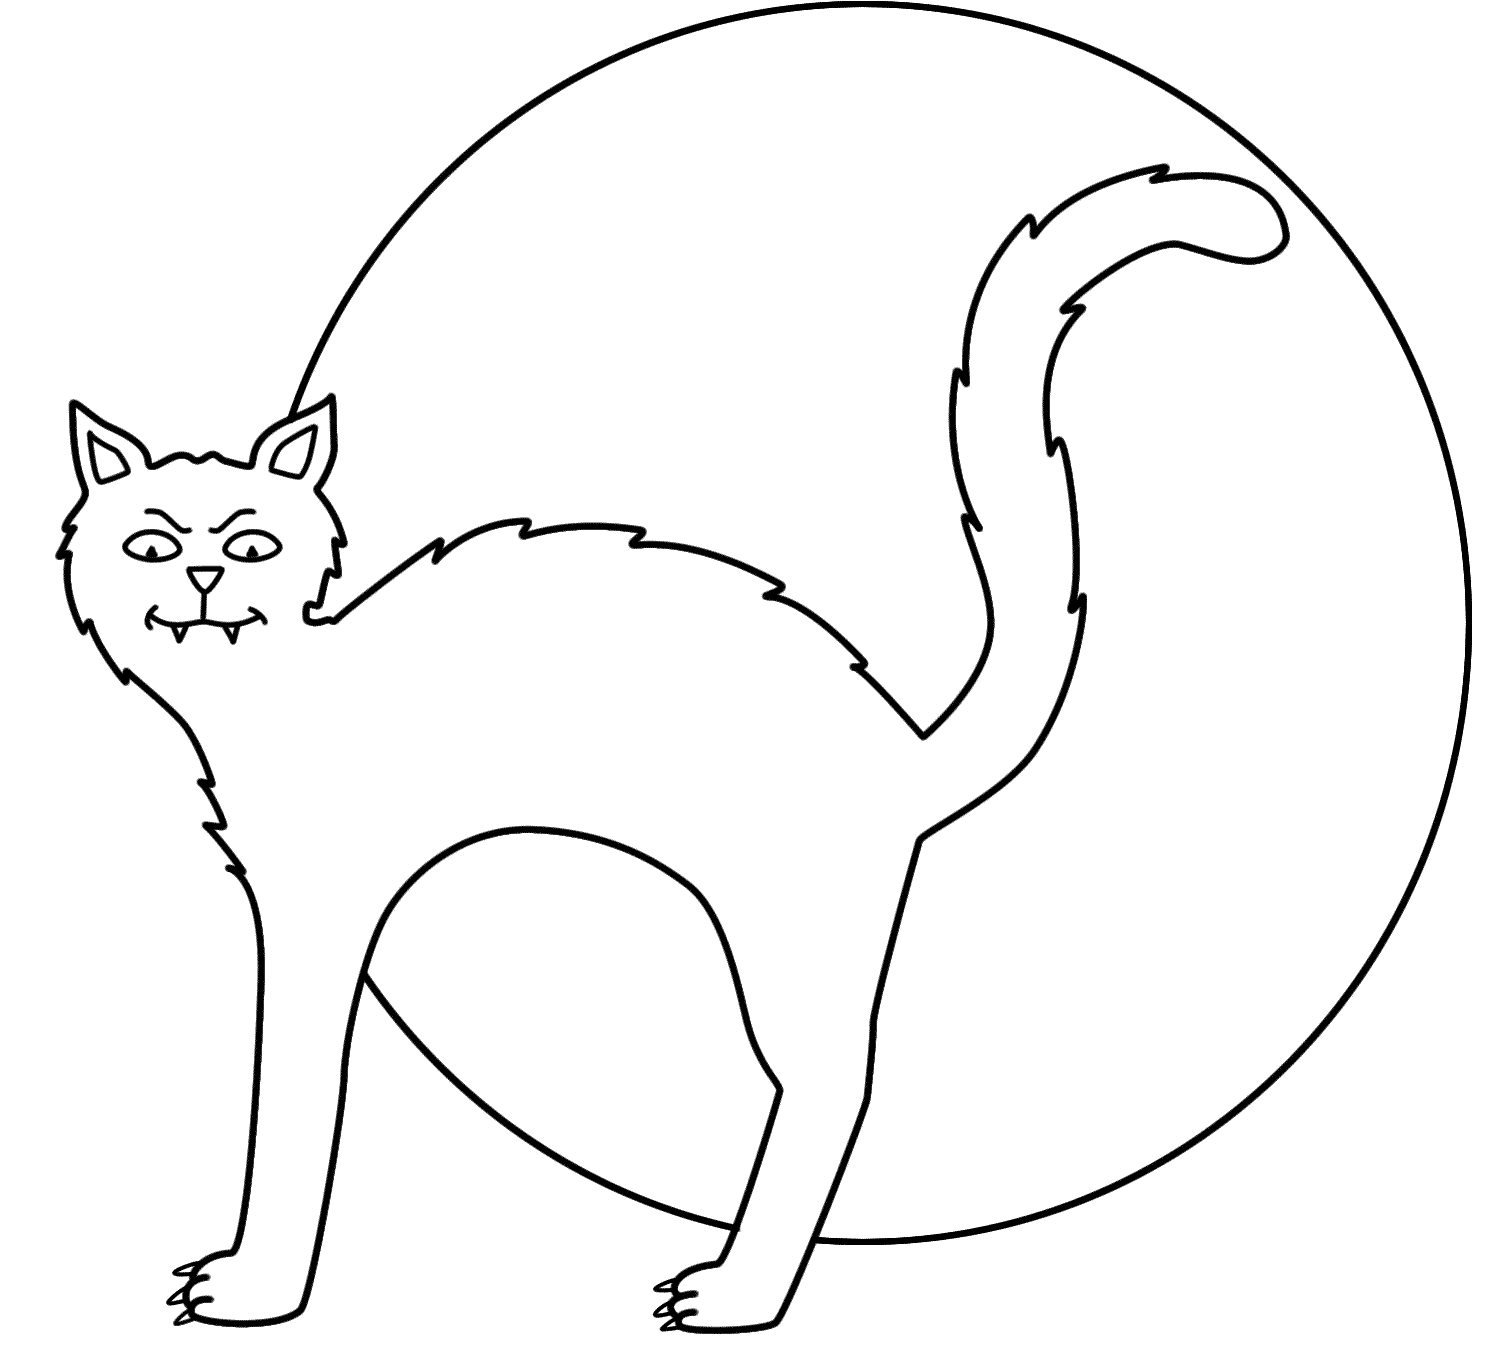 Black Cat Coloring Page - Coloring Pages for Kids and for Adults